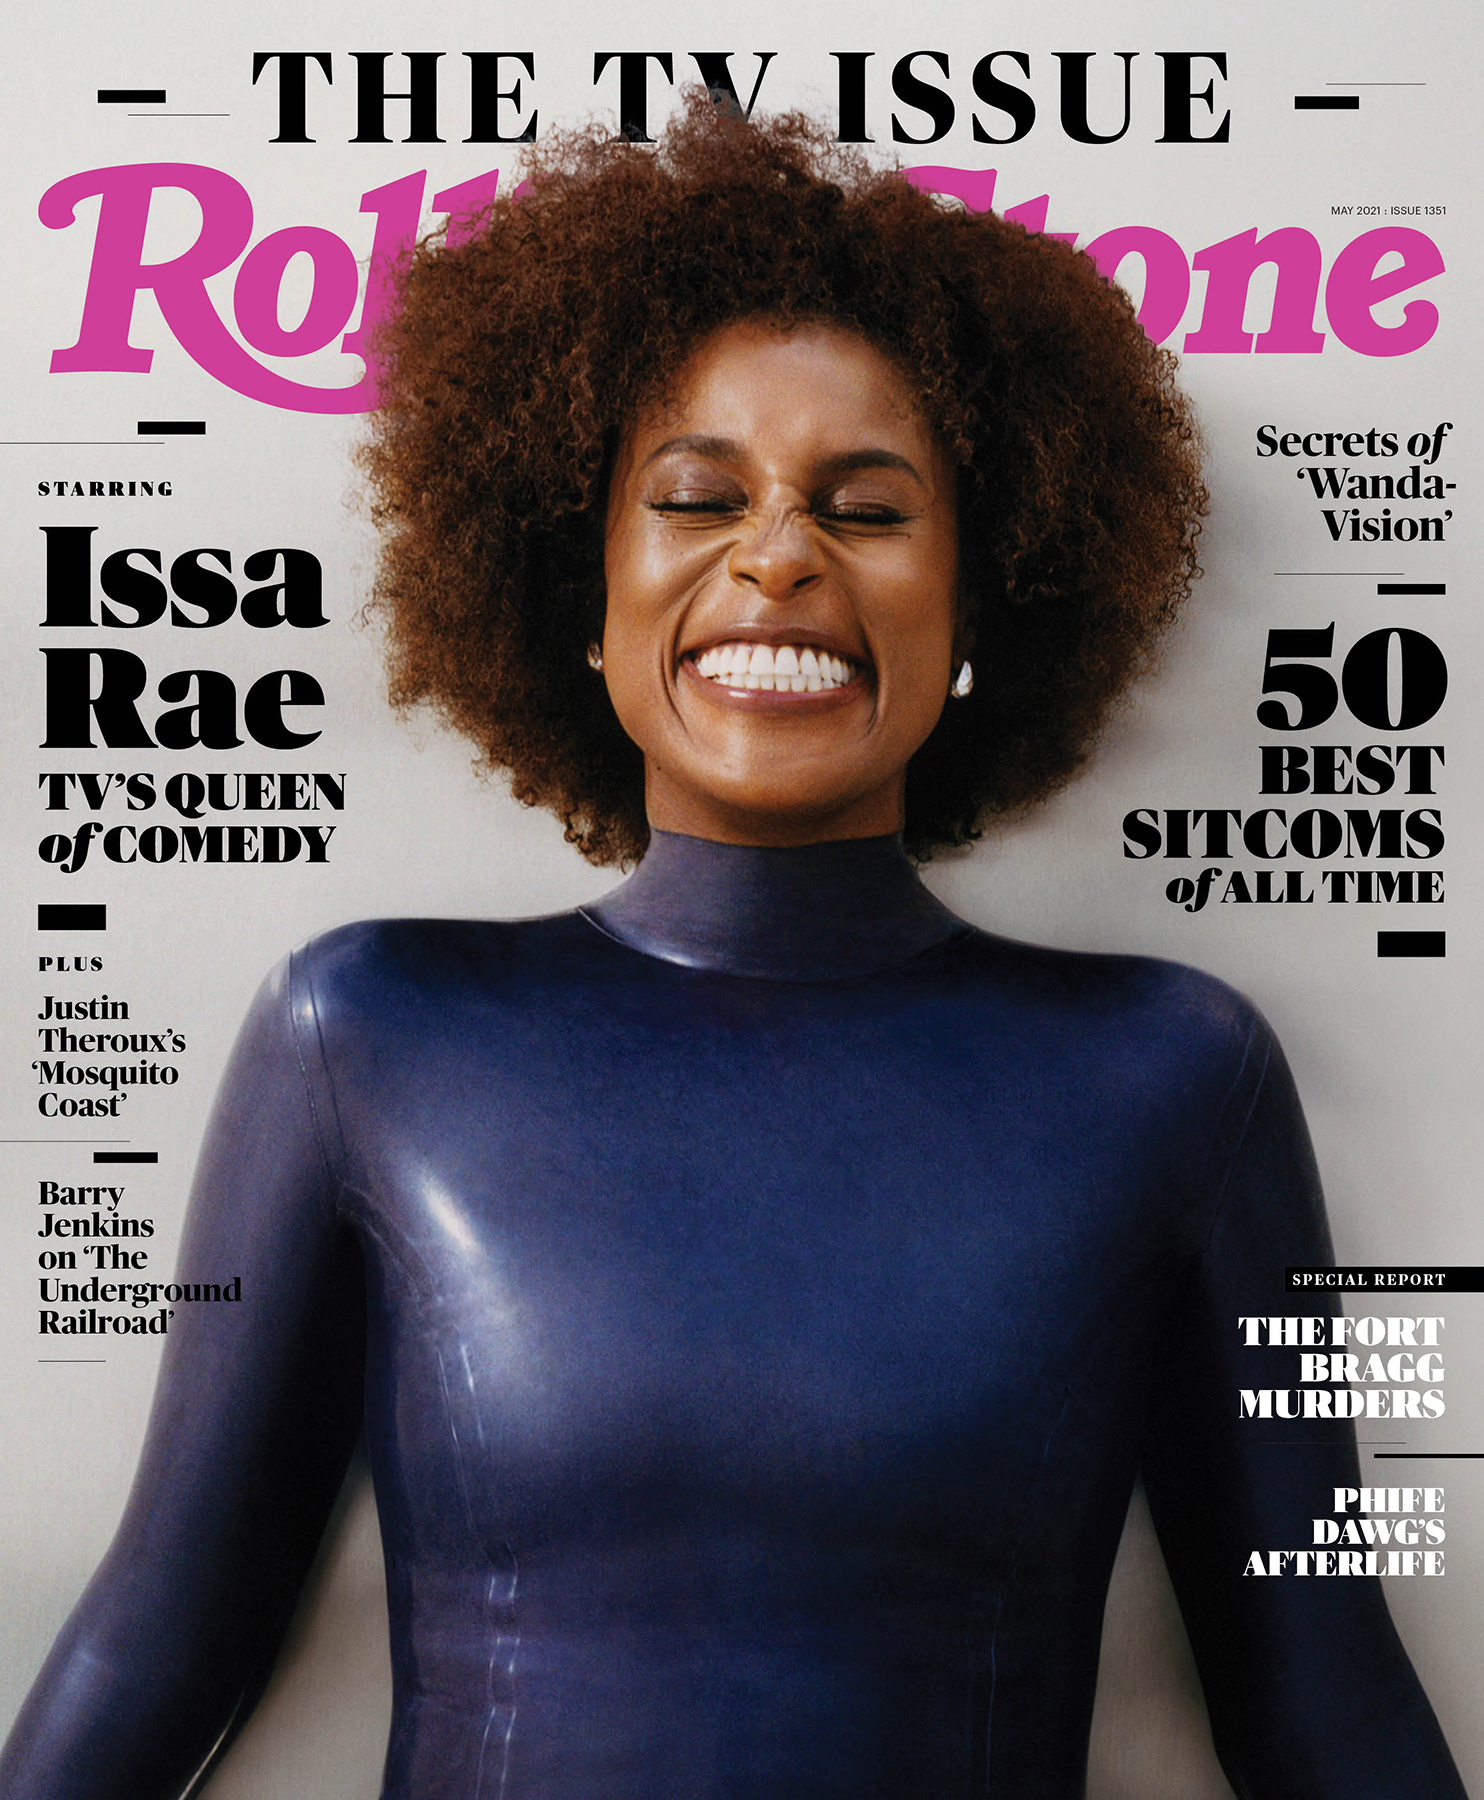 Issa Rae for Rolling Stone - Emily CottonTop